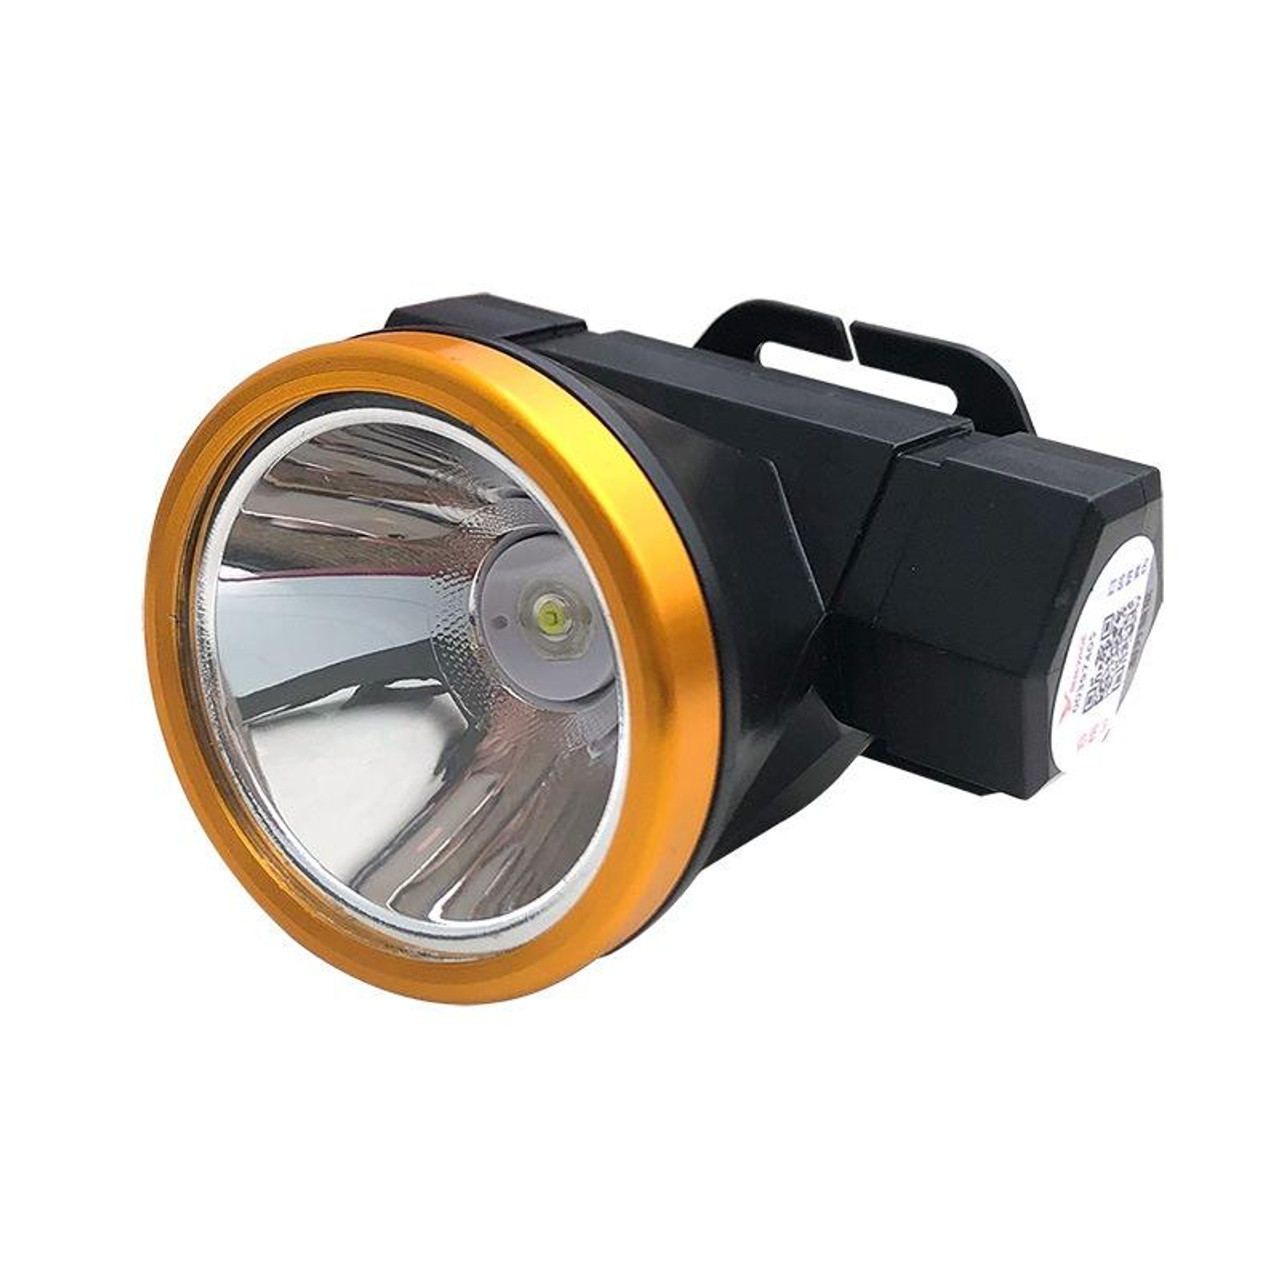 Yage LED Strong Light Rechargeable Headlight Outdoor Night Fishing Head- Mounted Miner Lamp, CN Plug(U108), snatcher